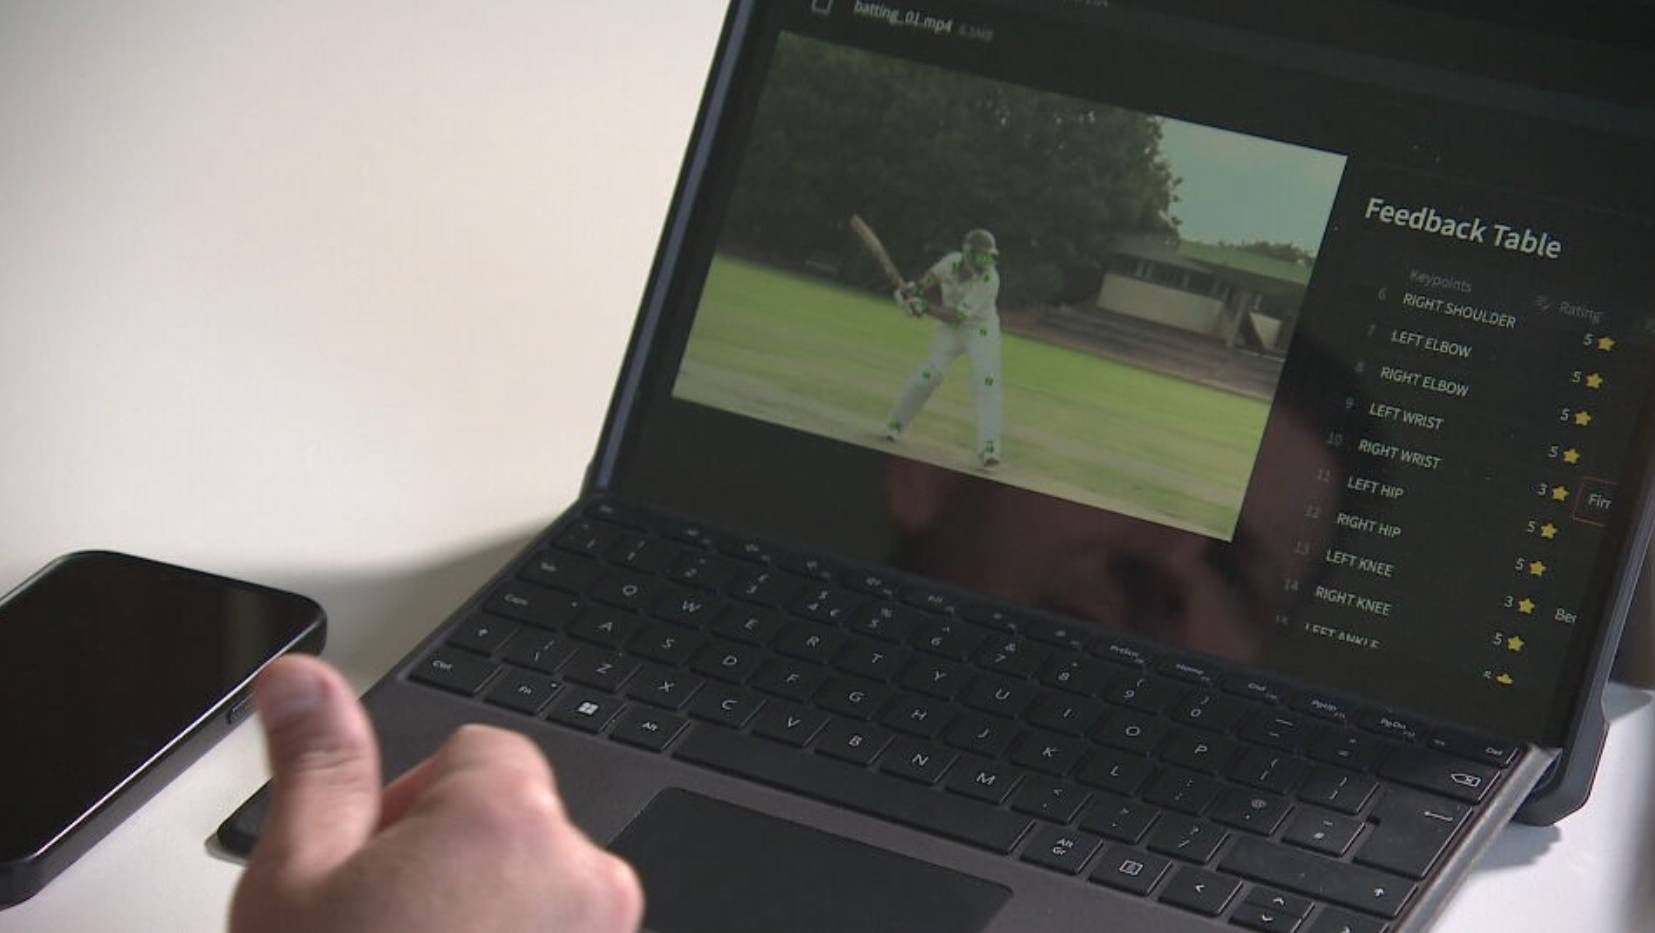 Jan Stander demonstrates new software to help coach sports players